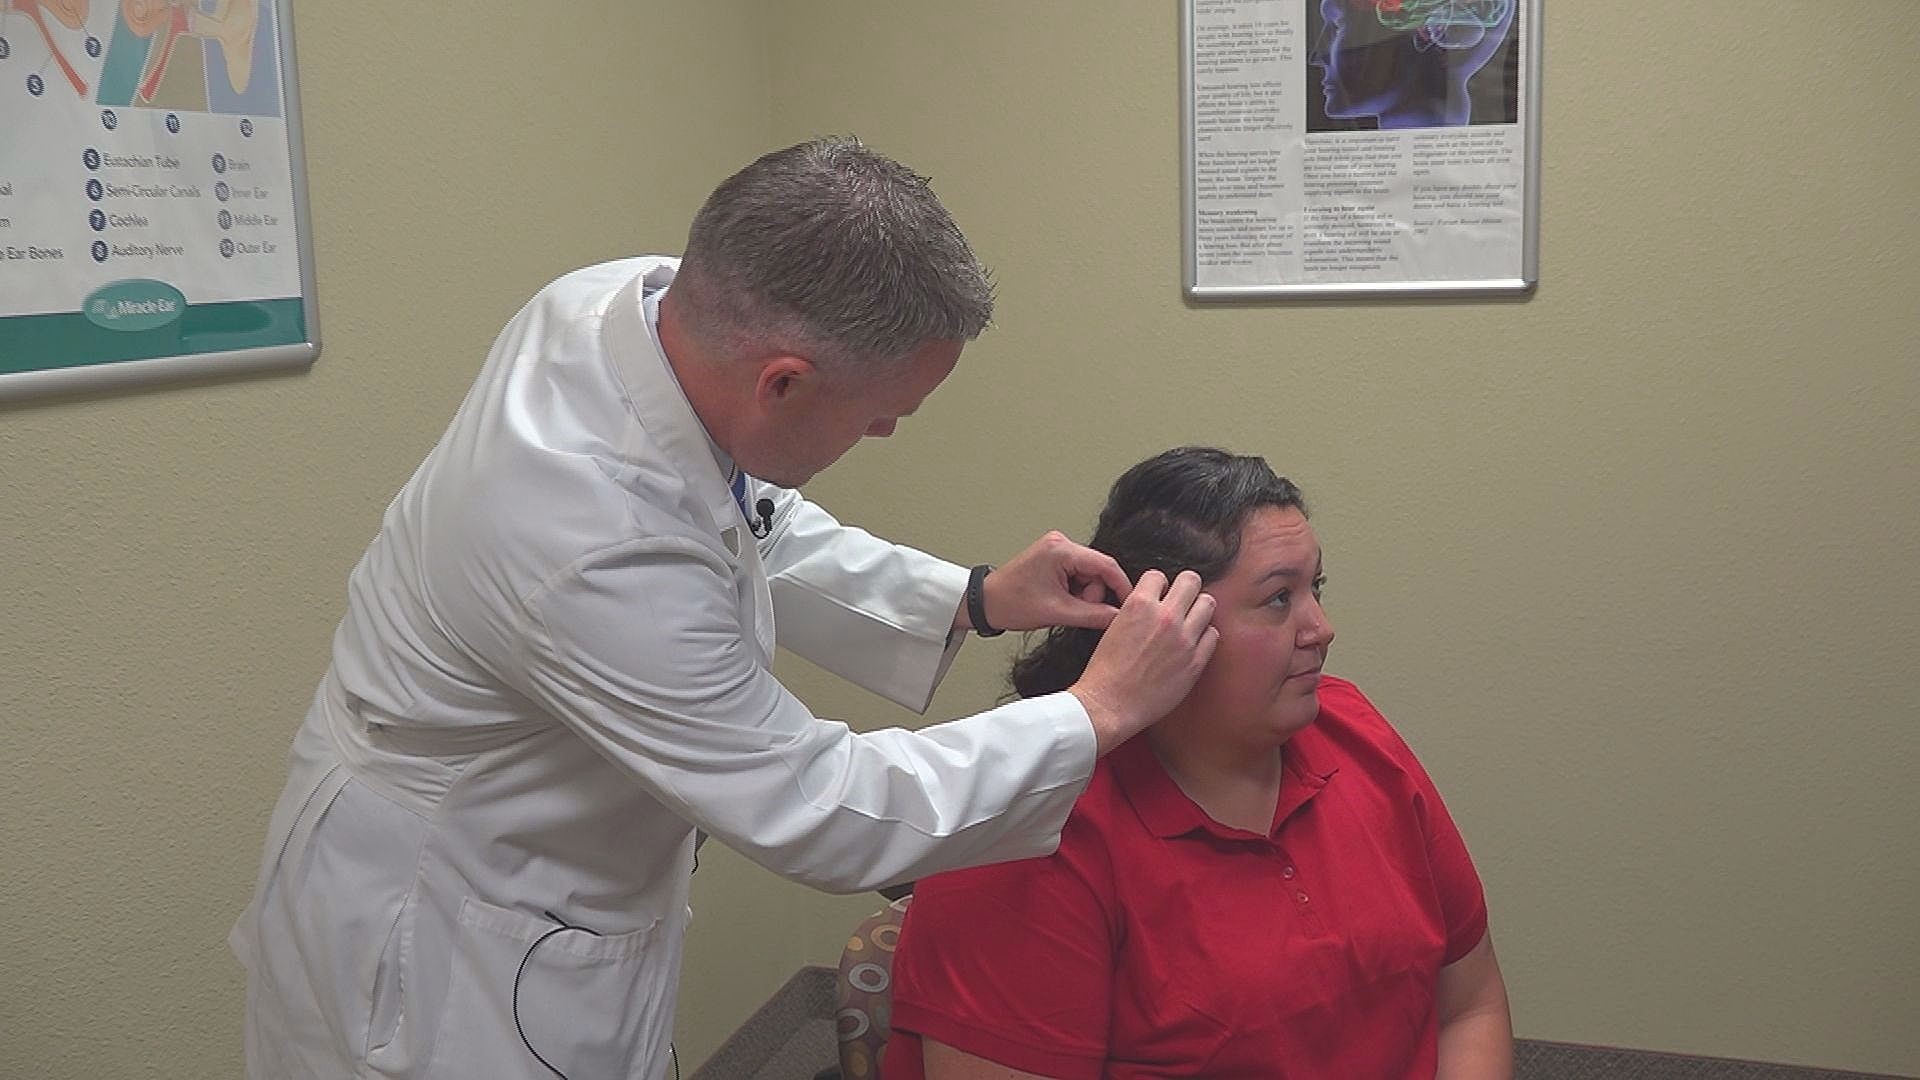 A Temple hearing care professional was recognized as top provider in the nation for helping the most people get hearing aids.